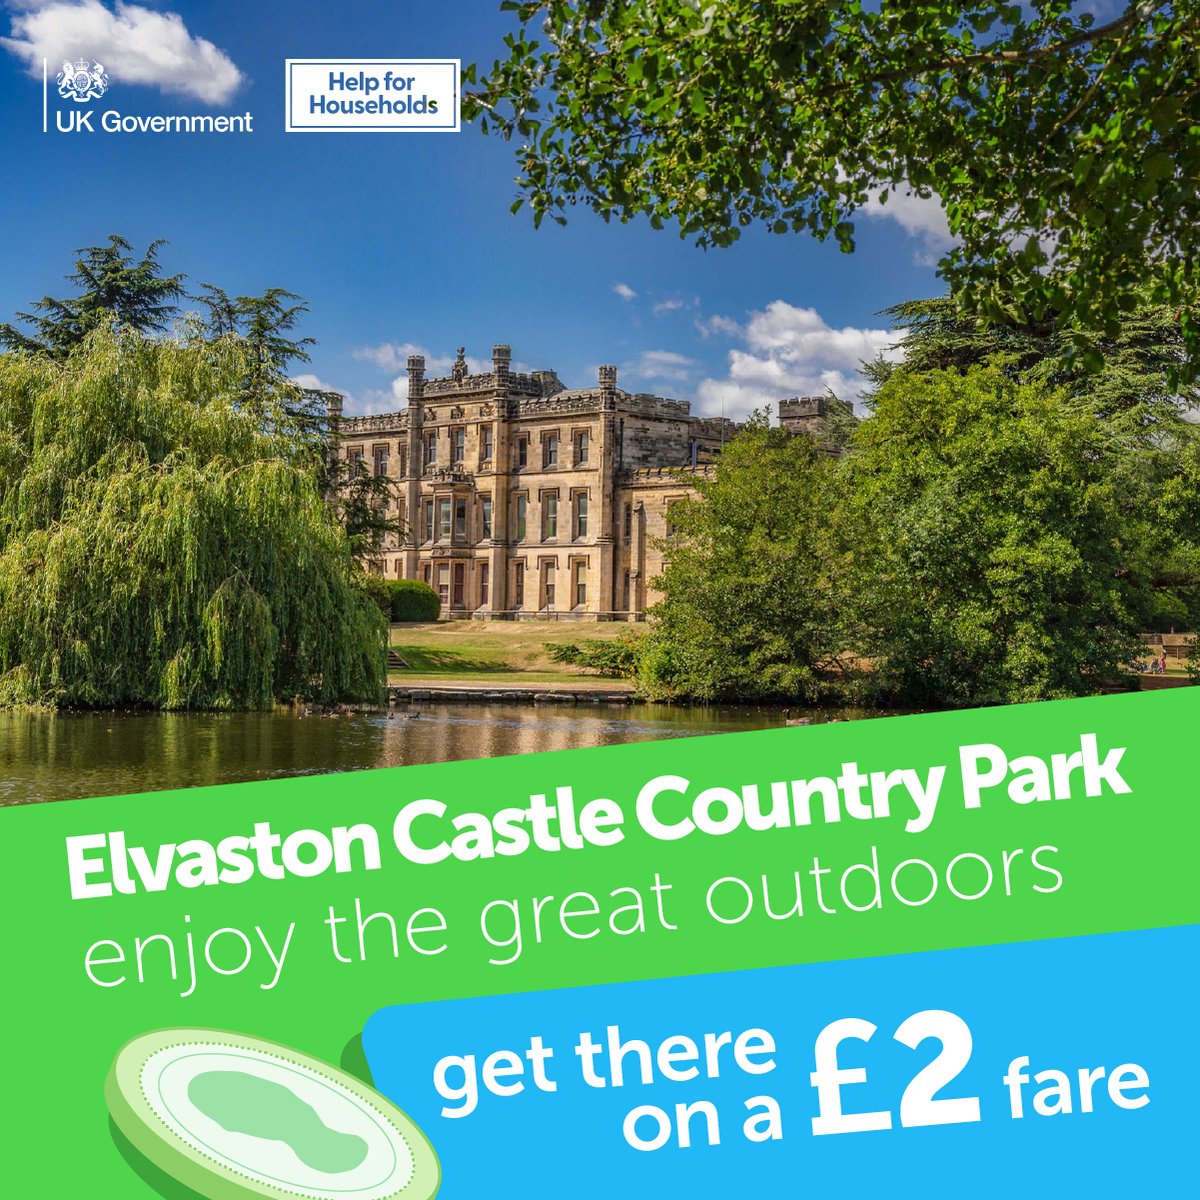 Enjoy some fresh air and discover new destinations🌳 Elvaston Castle Country Park is a historic estate with parkland, woodland and gardens near to Derby and Nottingham. Let us take you there on the £2 fare 🚍 Plan your trip today ⤵️ orlo.uk/exXin